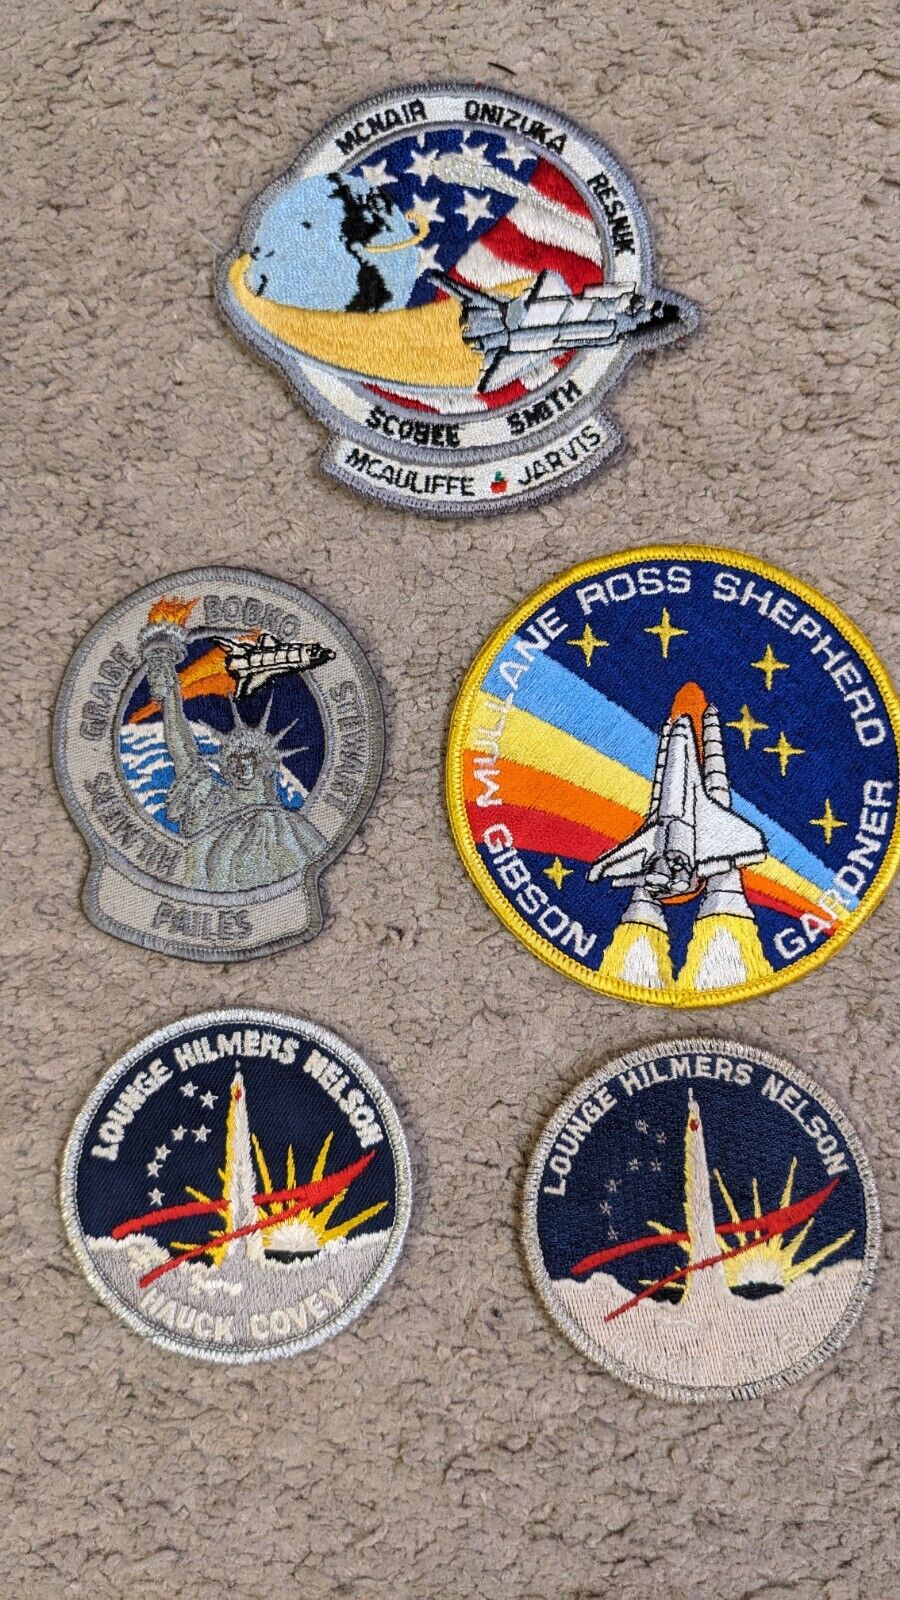 VTG NASA SPACE MISSION EMBROIDERED PATCHES LOT OF 5 DUPLICATES